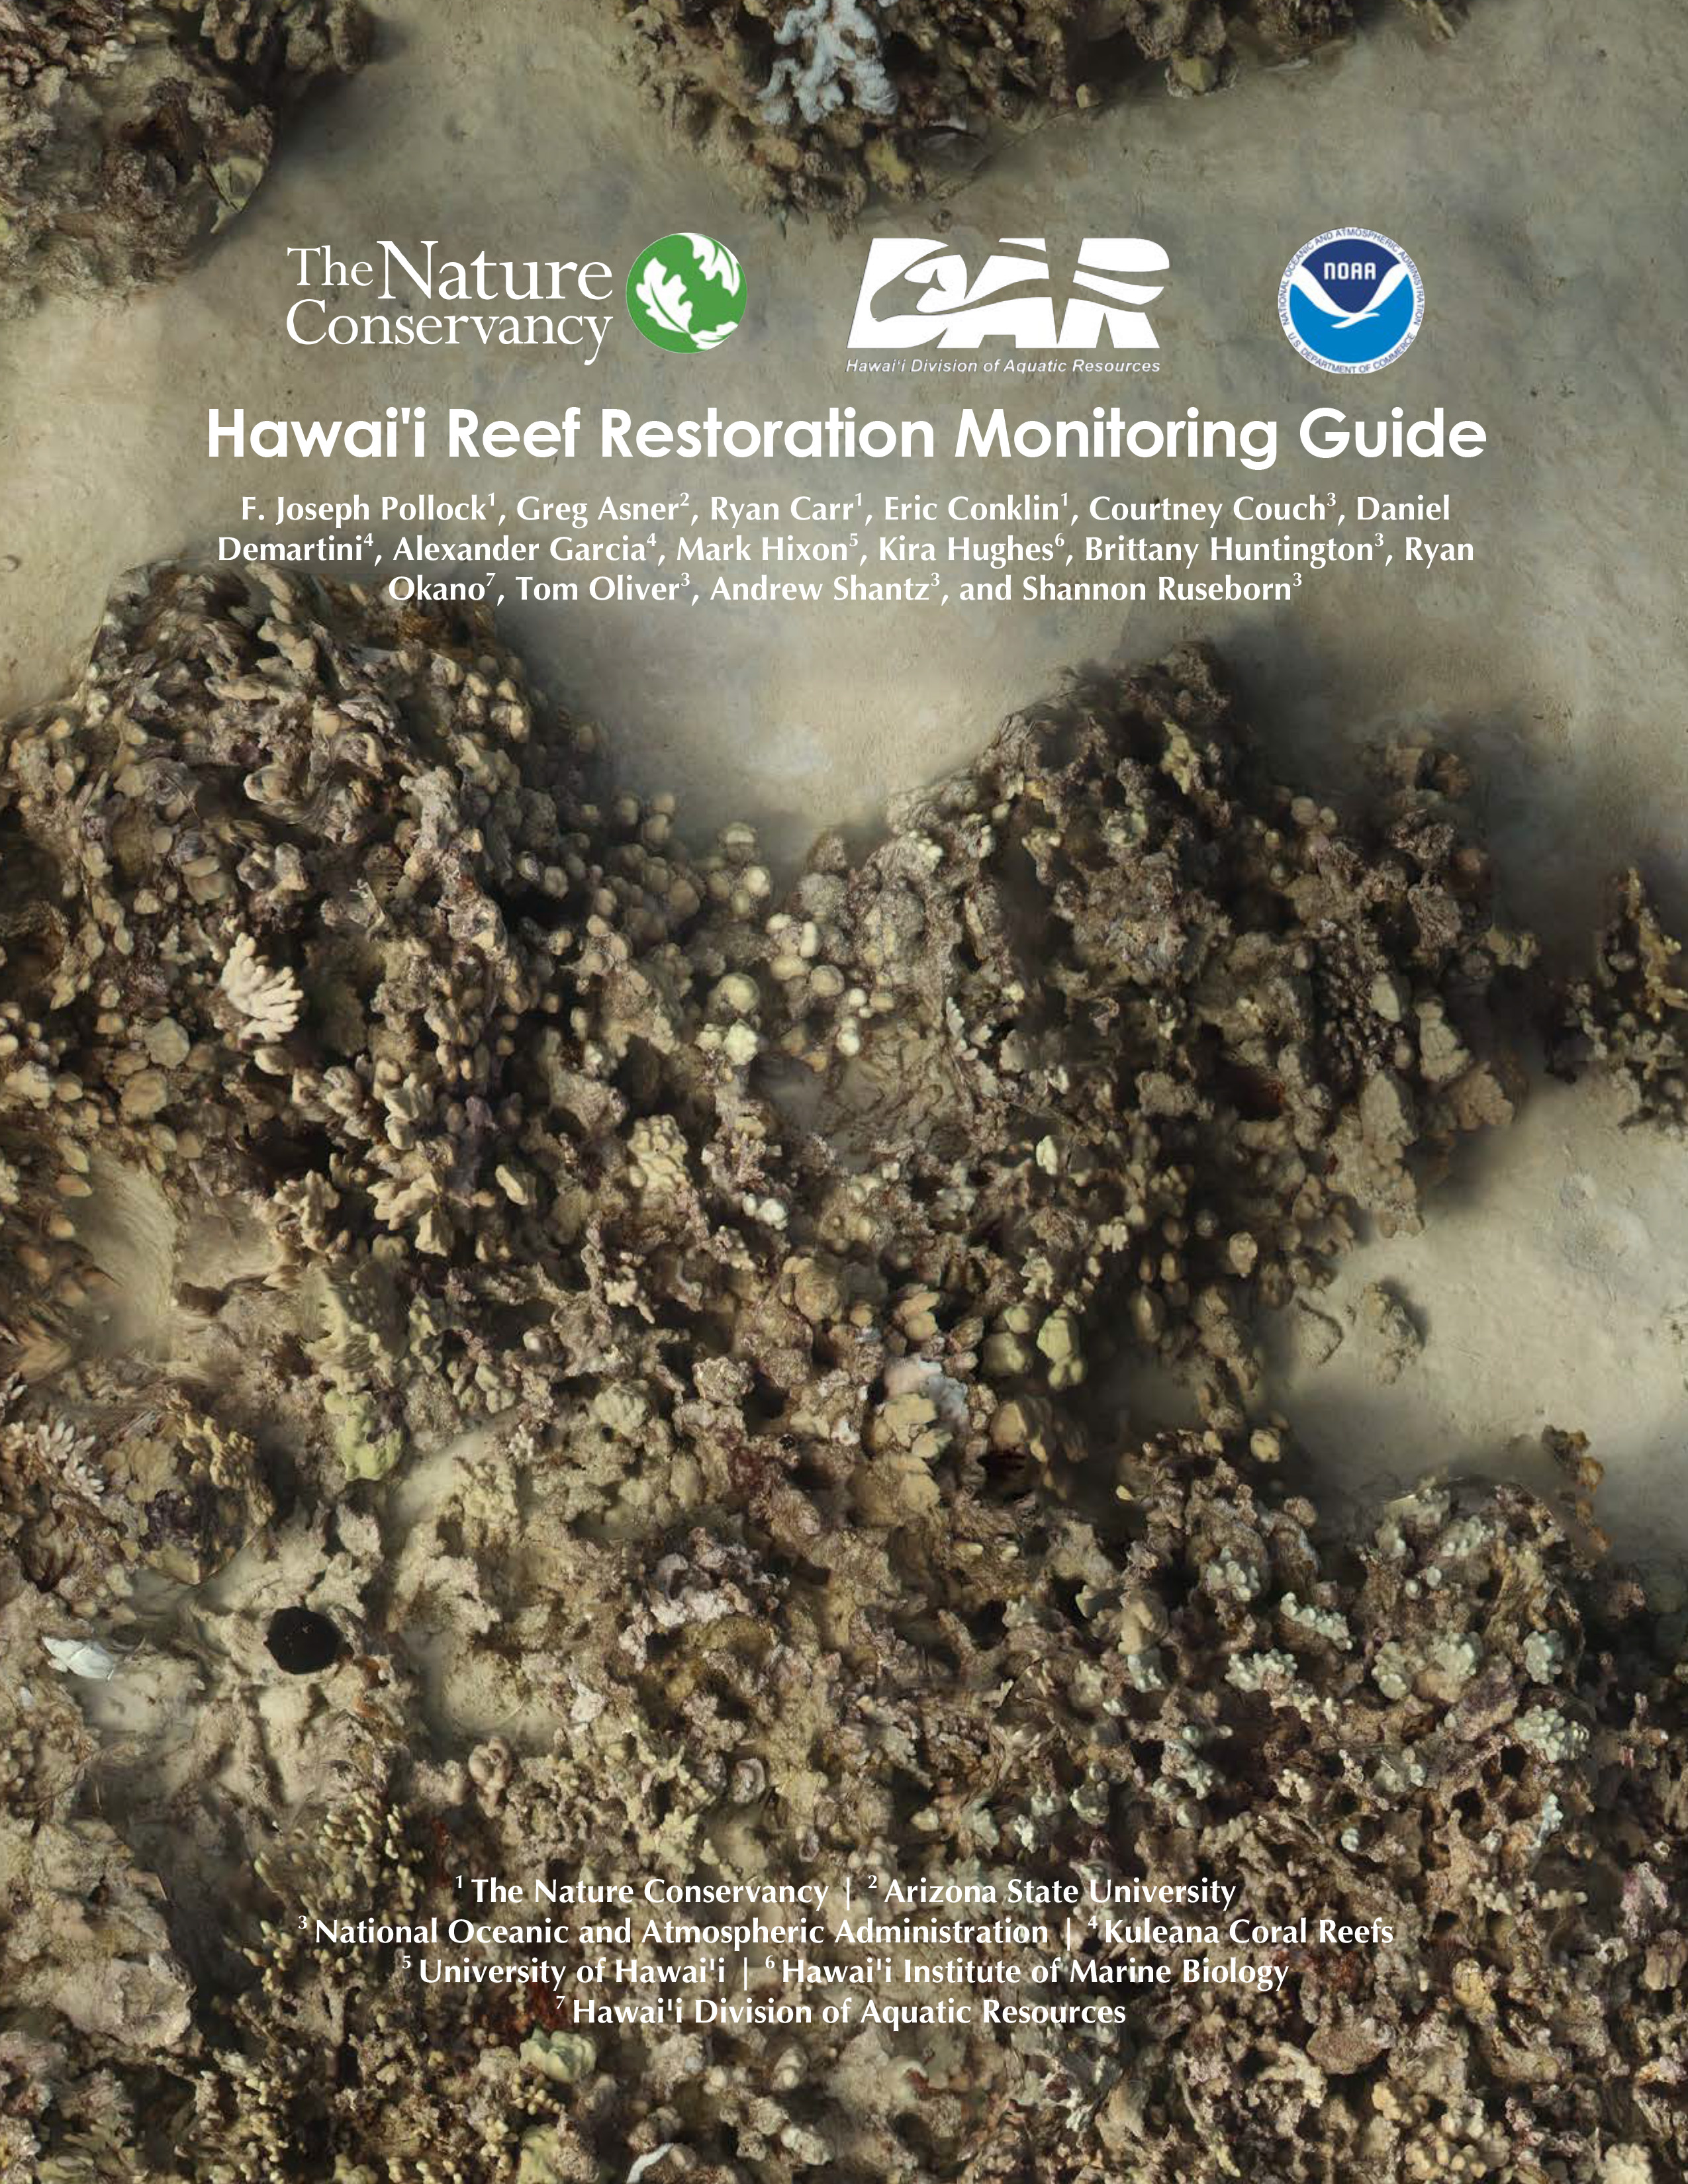 Cover of the Hawai‘i Reef Restoration Monitoring Guide with The Nature Conservancy, Hawai‘i Division of Aquatic Resources & National Oceanic and Atmospheric Administration logos and a muted seafloor.